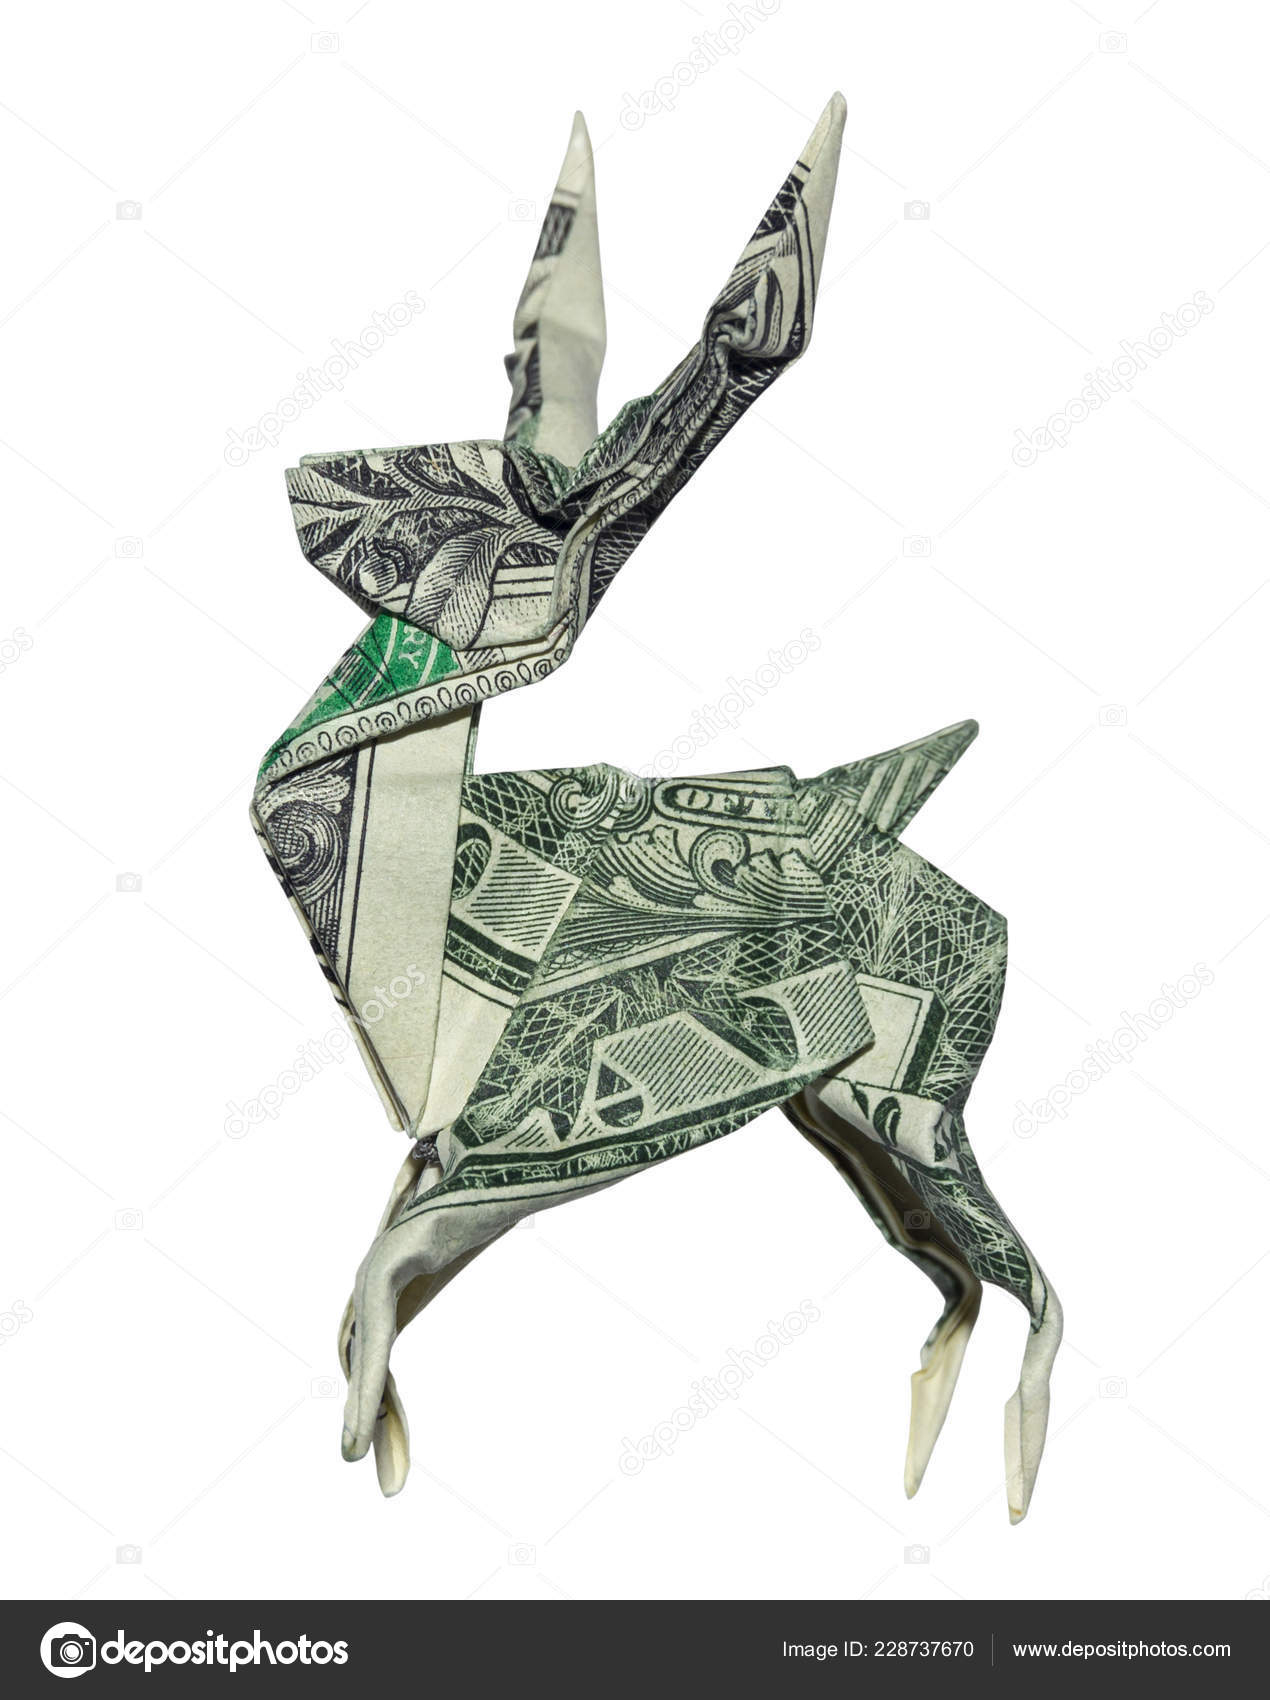 Dollar Bill Origami Money Origami Deer Folded Real One Dollar Bill Stag Isolated Stock